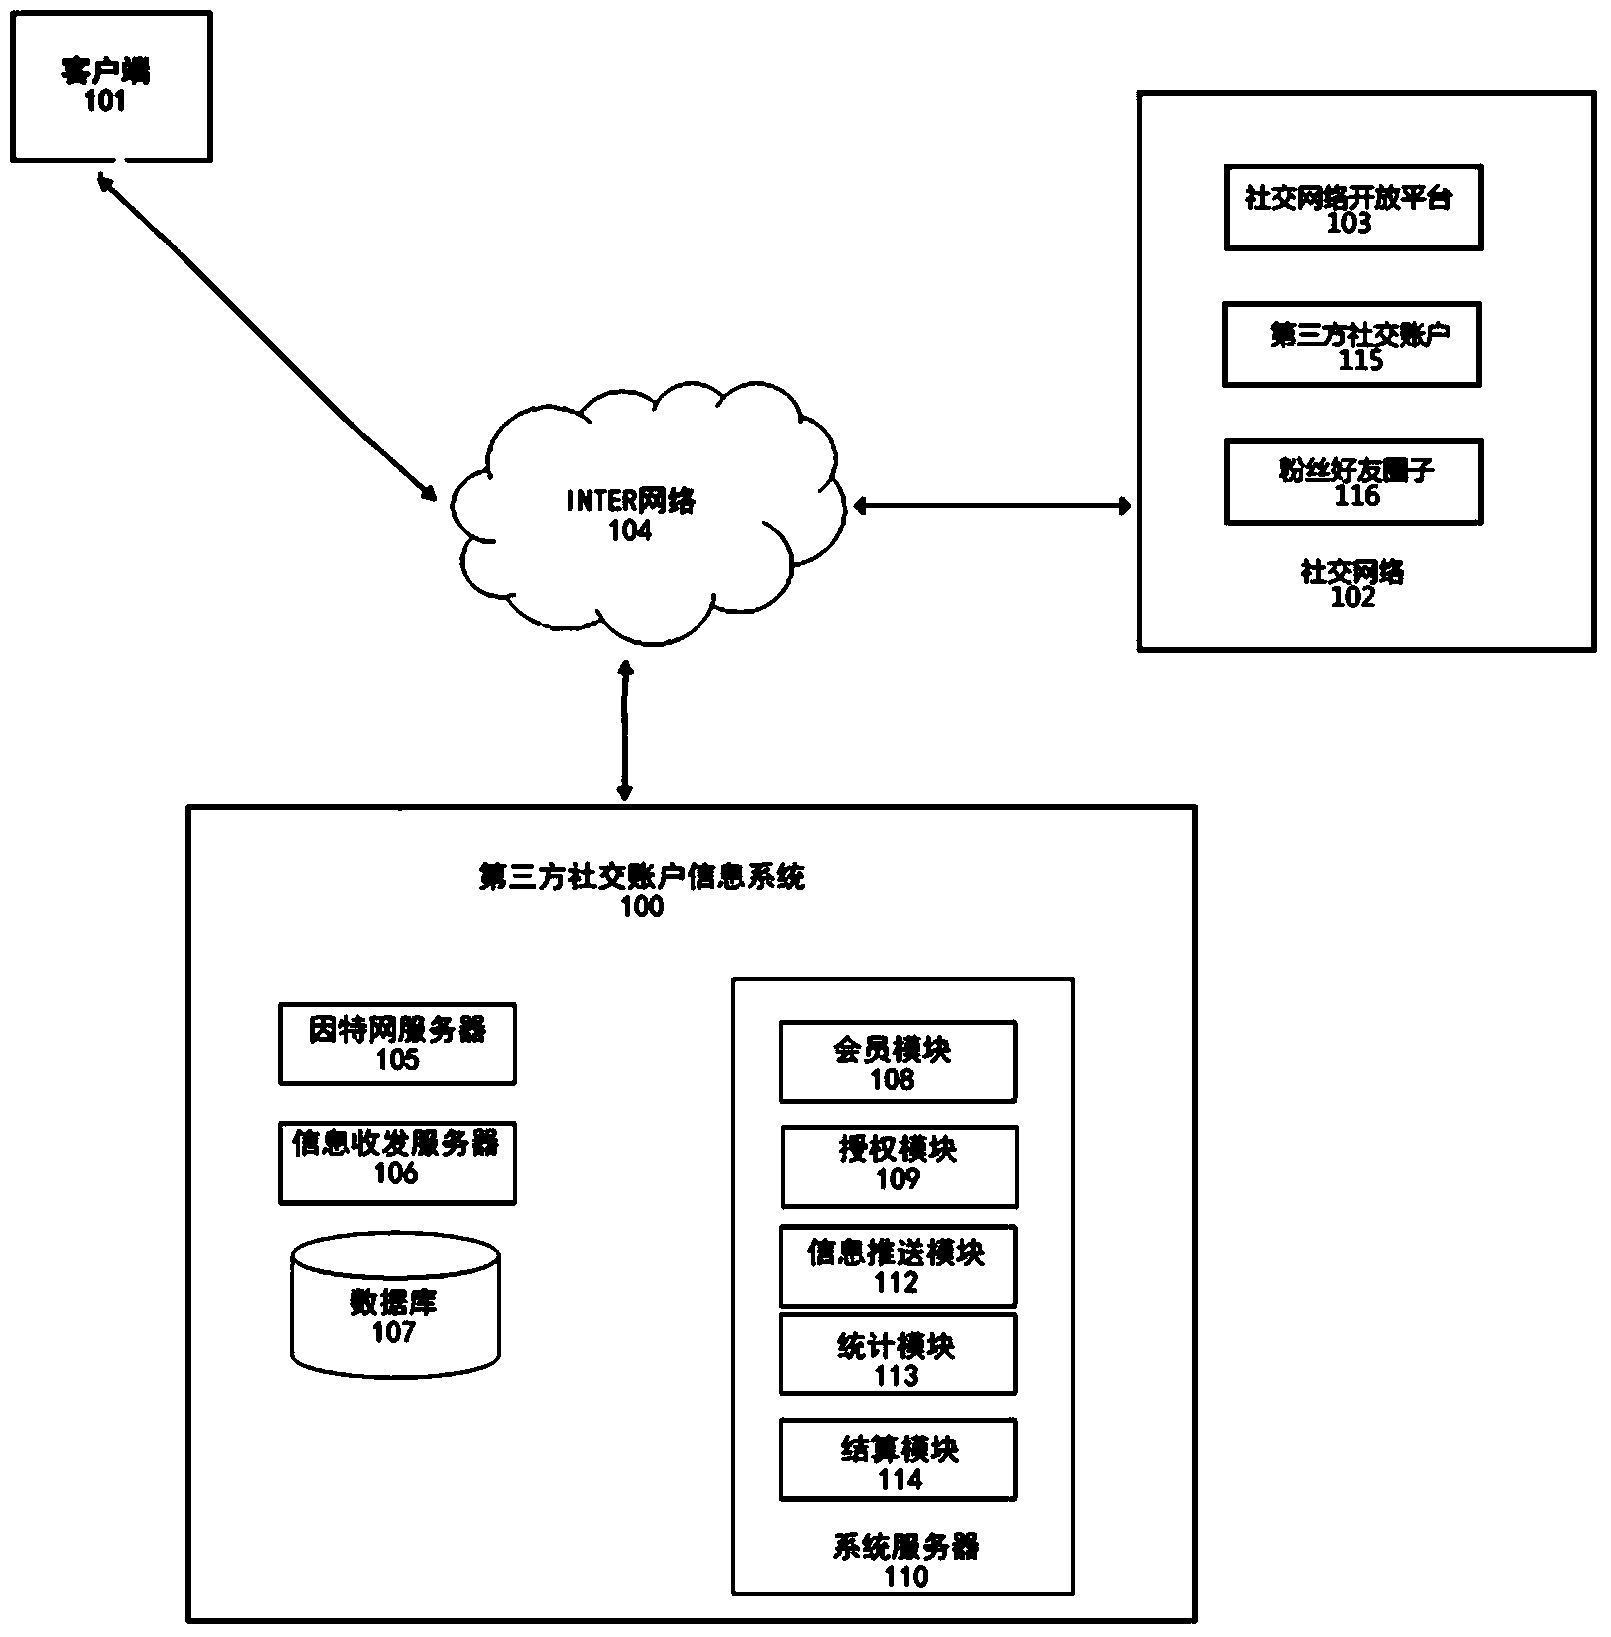 System and method for conducting information spreading through third party social account